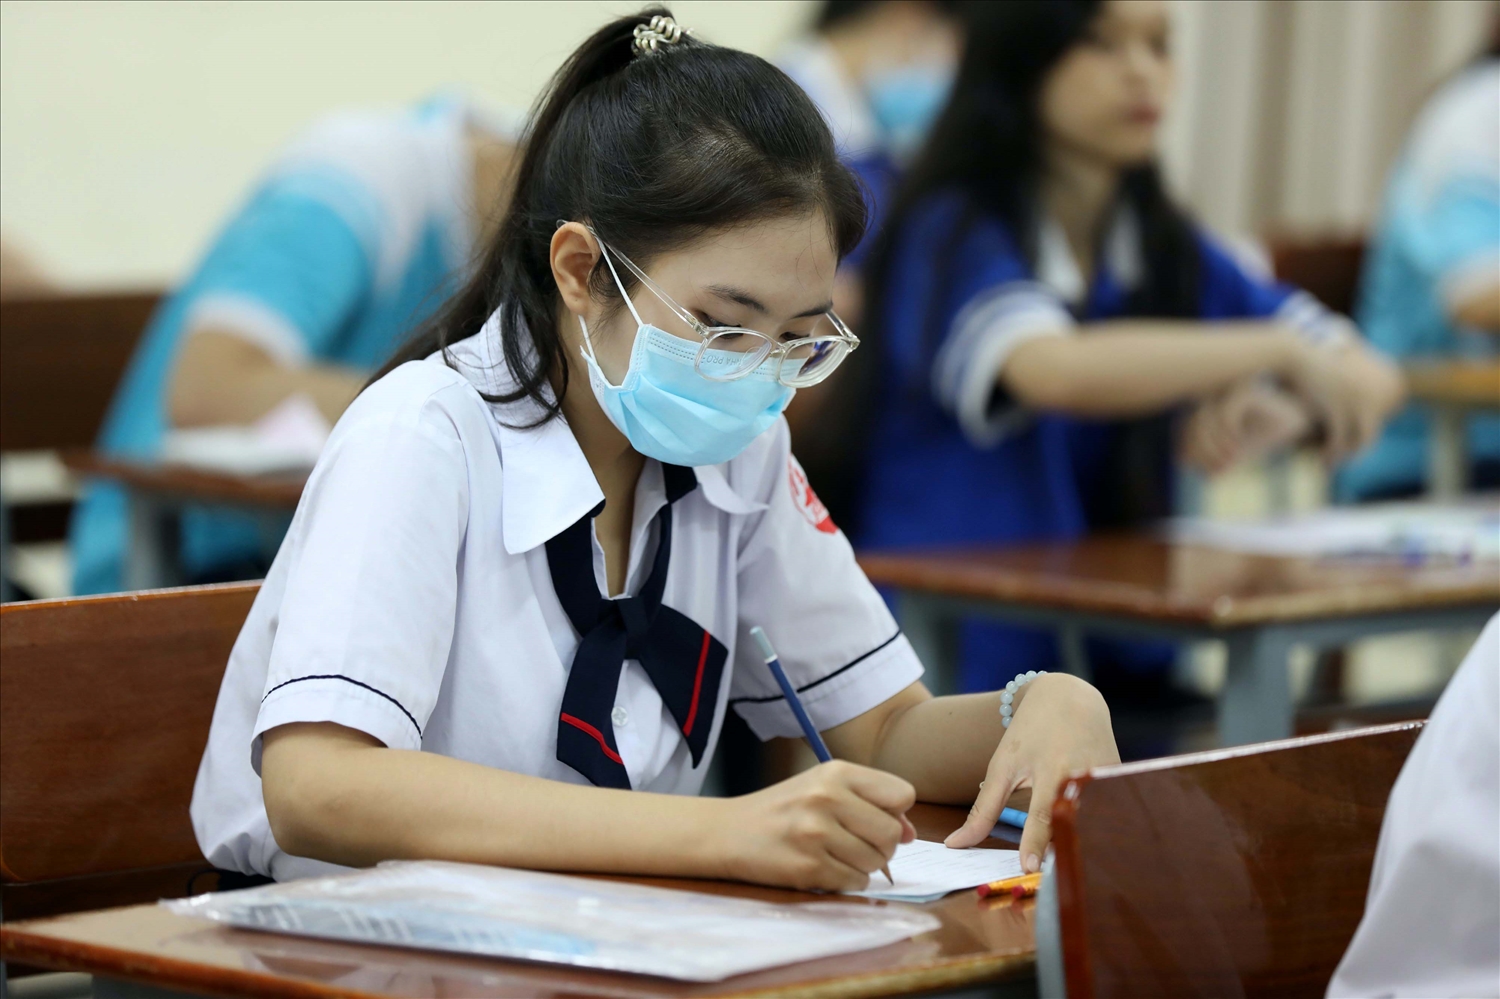 What are regulations on the marking area for the national high school exam 2022 in Vietnam?